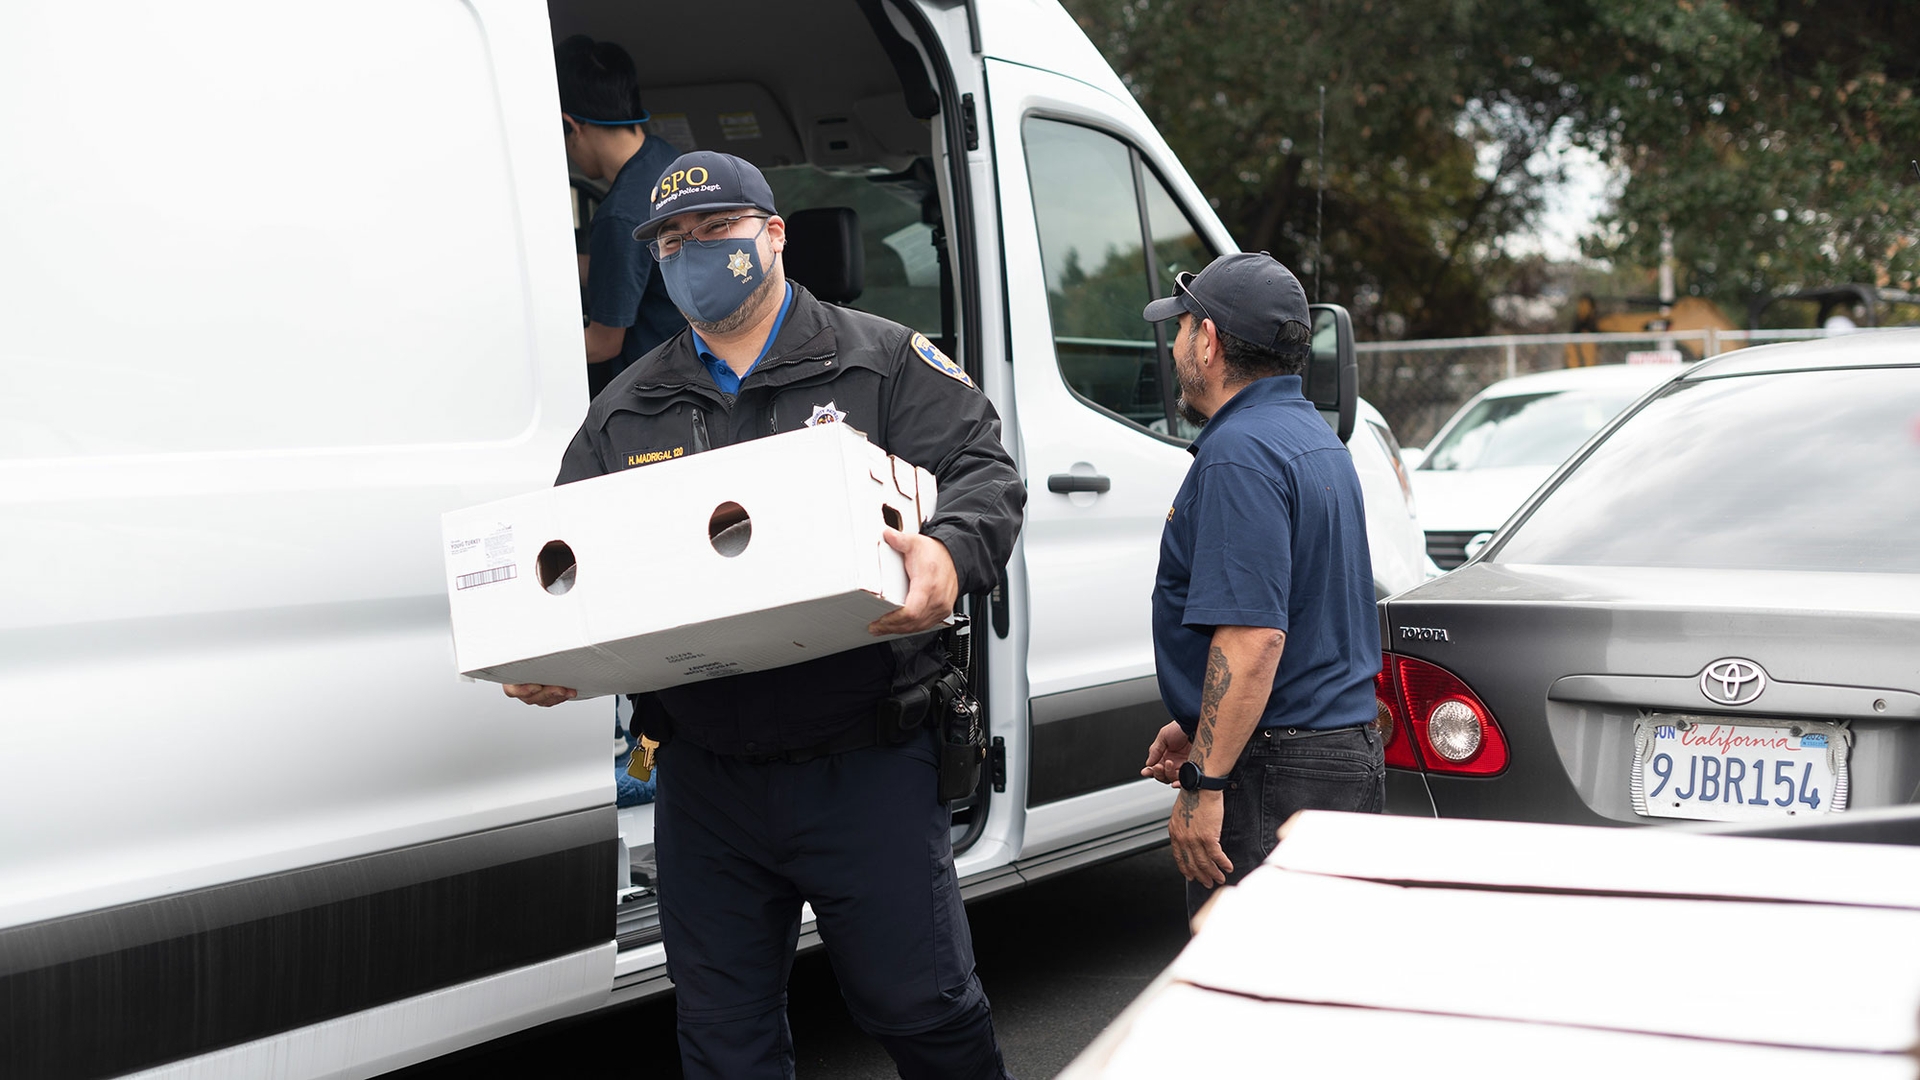 A volunteer wearing a police uniform unloads a box from a white van.